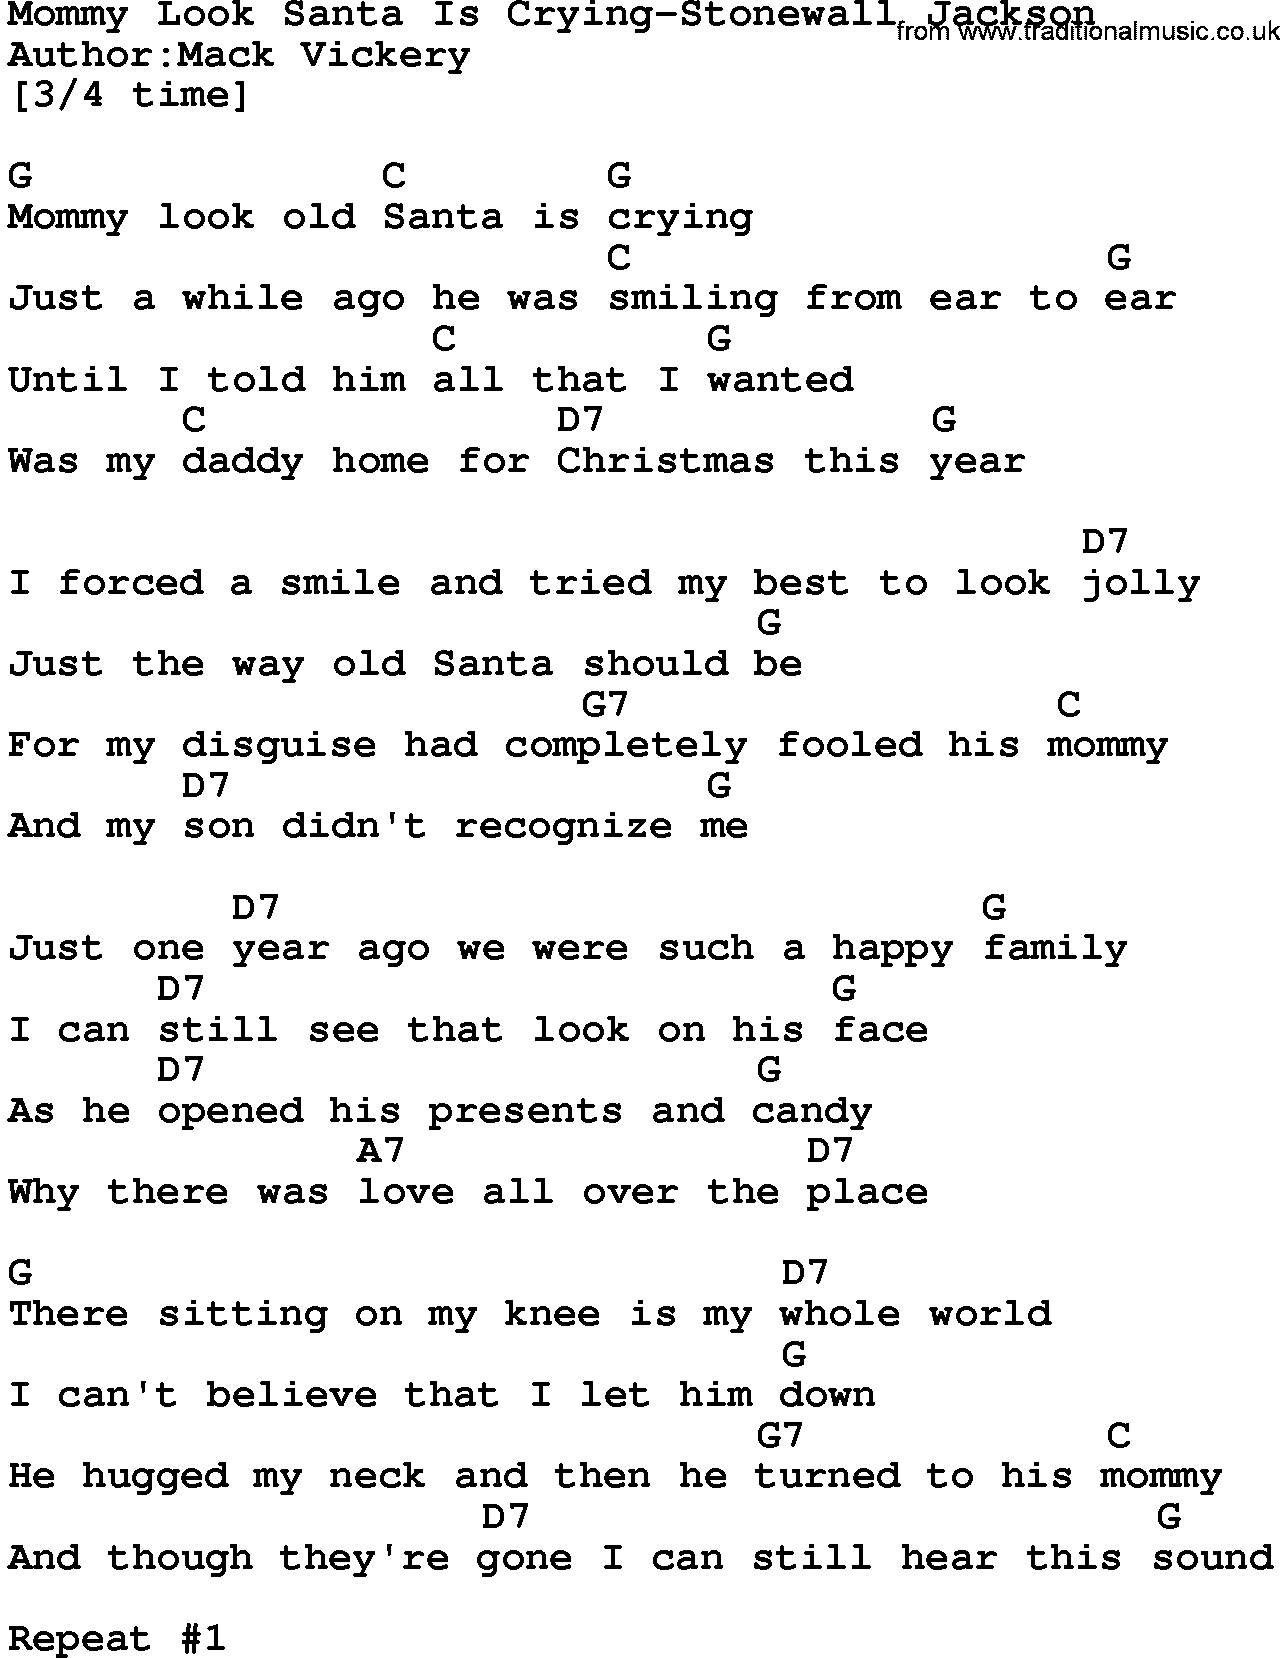 Country music song: Mommy Look Santa Is Crying-Stonewall Jackson lyrics and chords